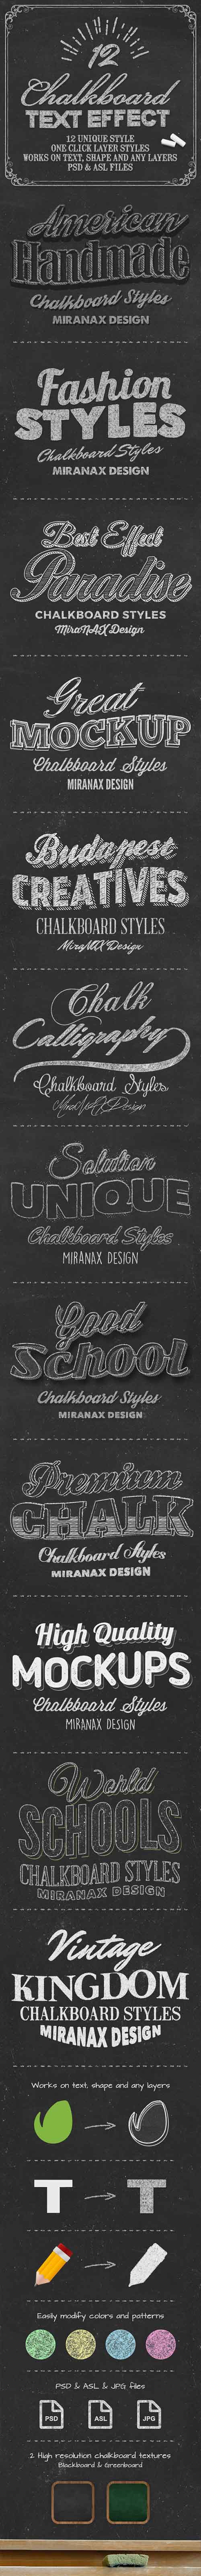 GraphicRiver - Chalkboard Photoshop PSD Layer Styles 10785351